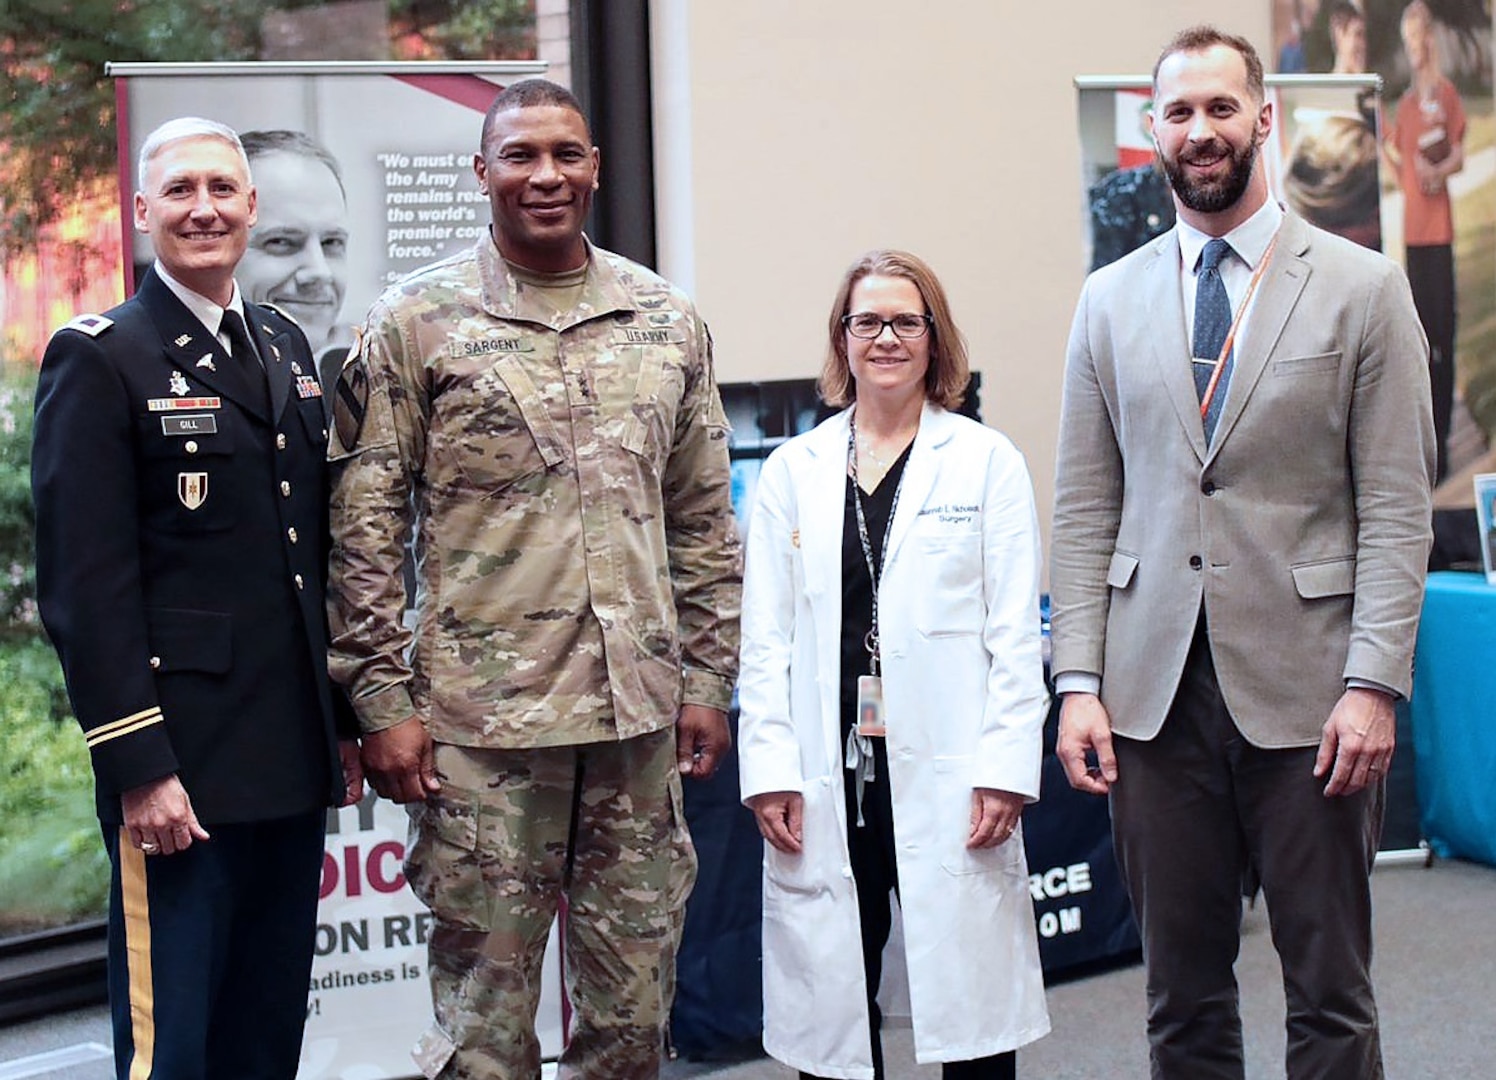 (From left) Col. Skip Gill, Dean of the U.S. Army Medical Department Center and School, Health Readiness Center of Excellence Graduate School; Maj. Gen. Patrick D. Sargent, commander, AMEDDC&S HRCoE; Dr. Susannah Nicholson, assistant professor and director of trauma research, Department of Surgery, UT Health San Antonio; and Dr. Jeremy Nelson, assistant deputy director, Military Health Institute, UT Health San Antonio.